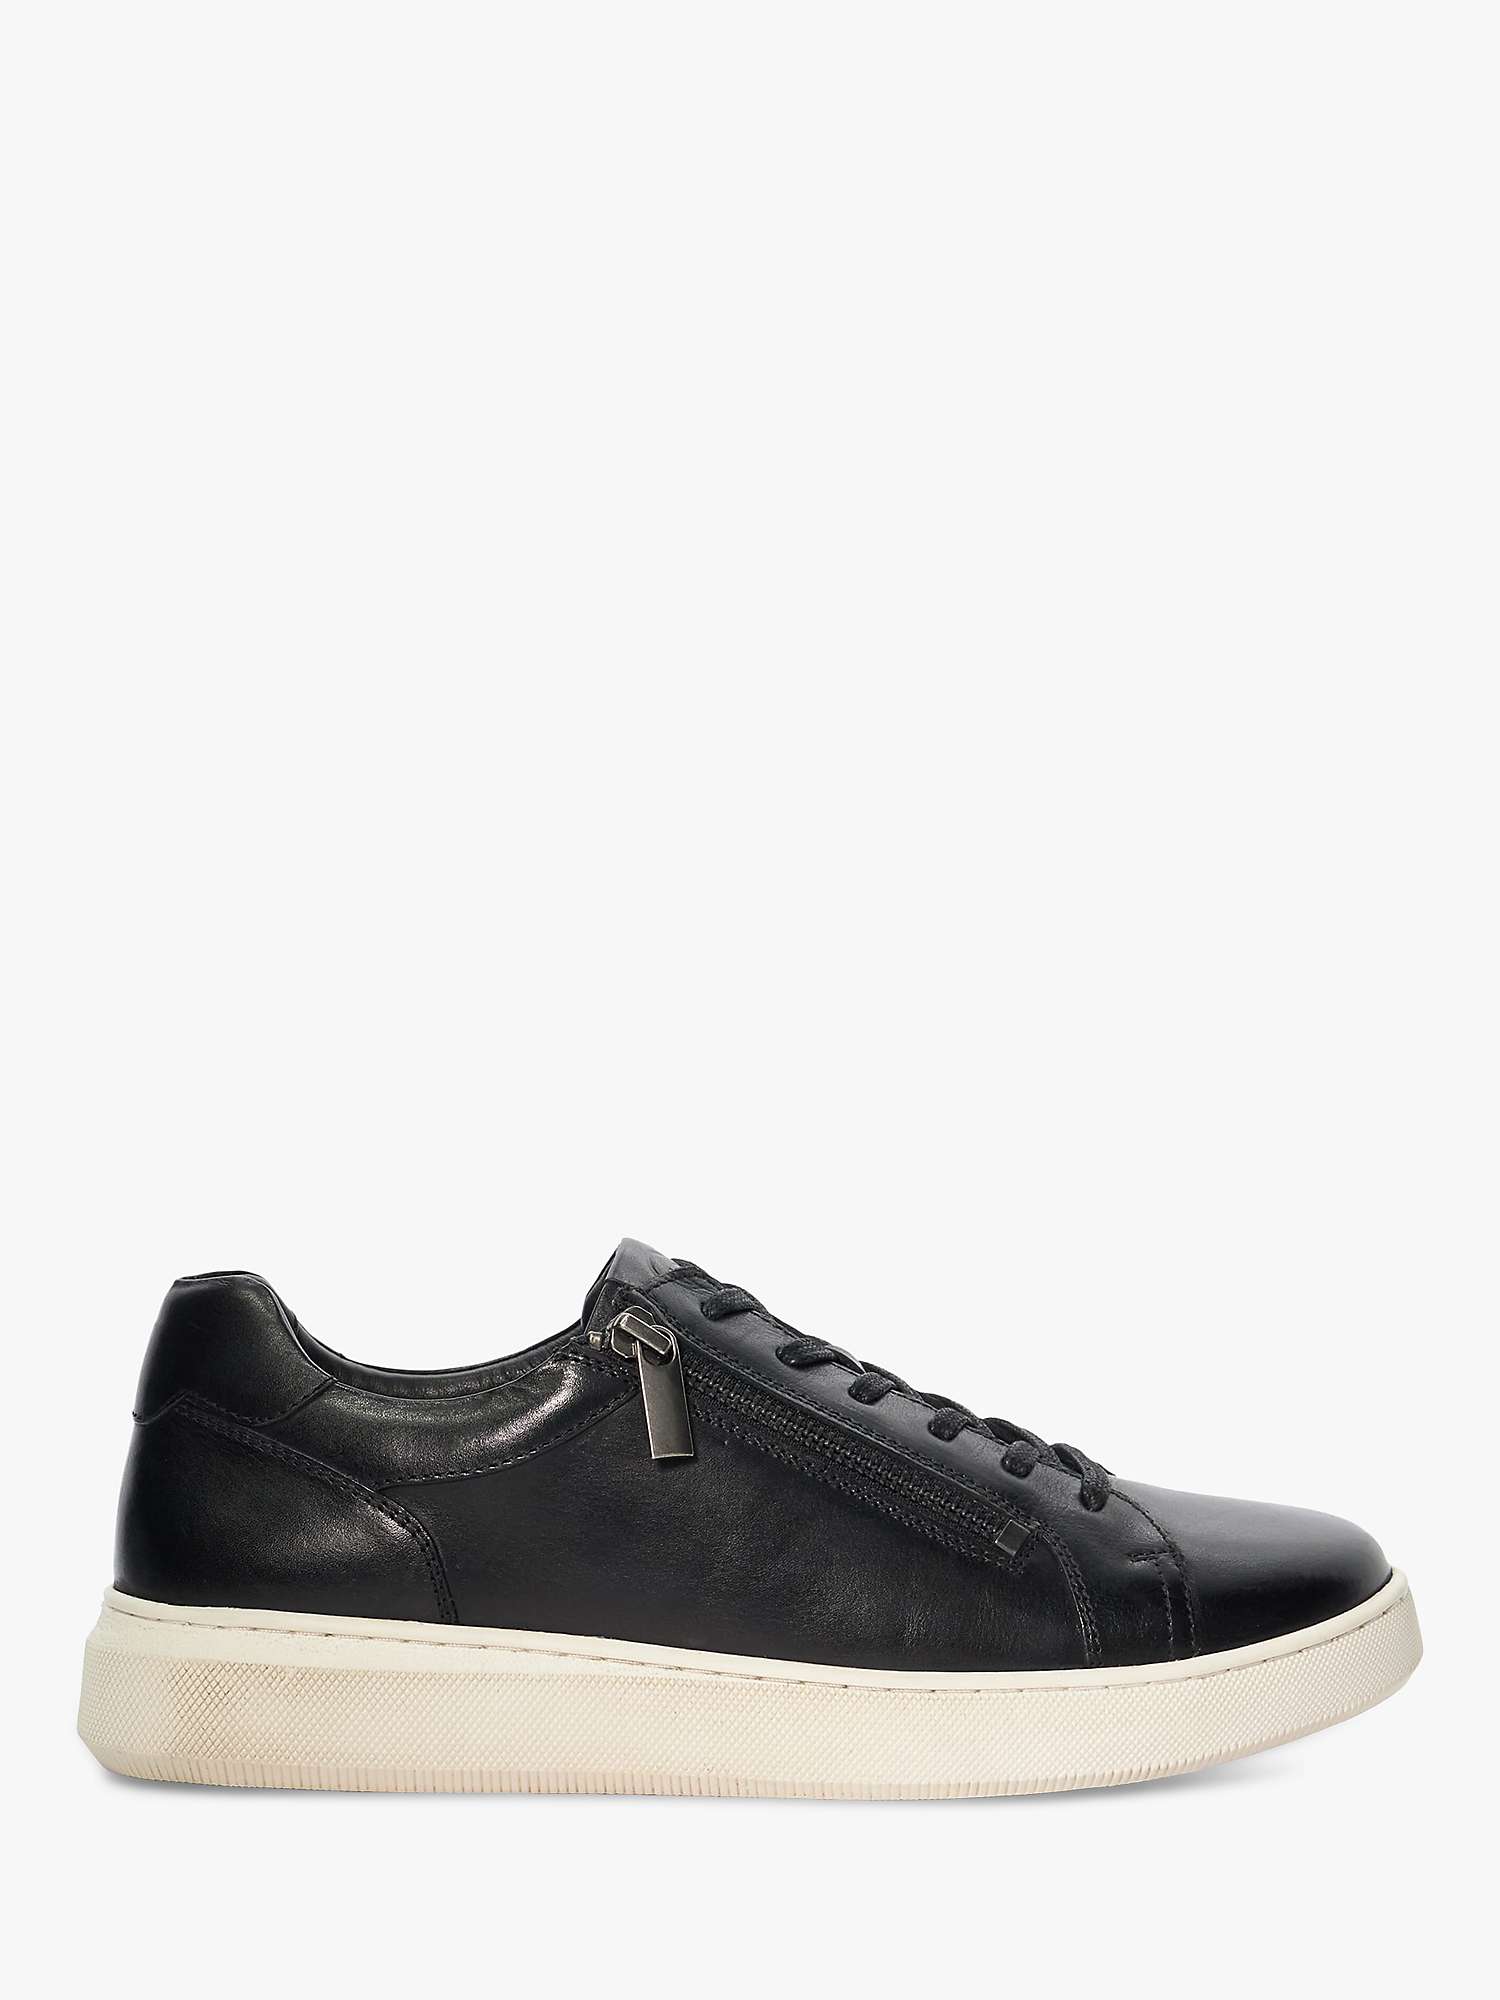 Buy Dune Tribute Leather Zip Detail Trainers, Black Online at johnlewis.com